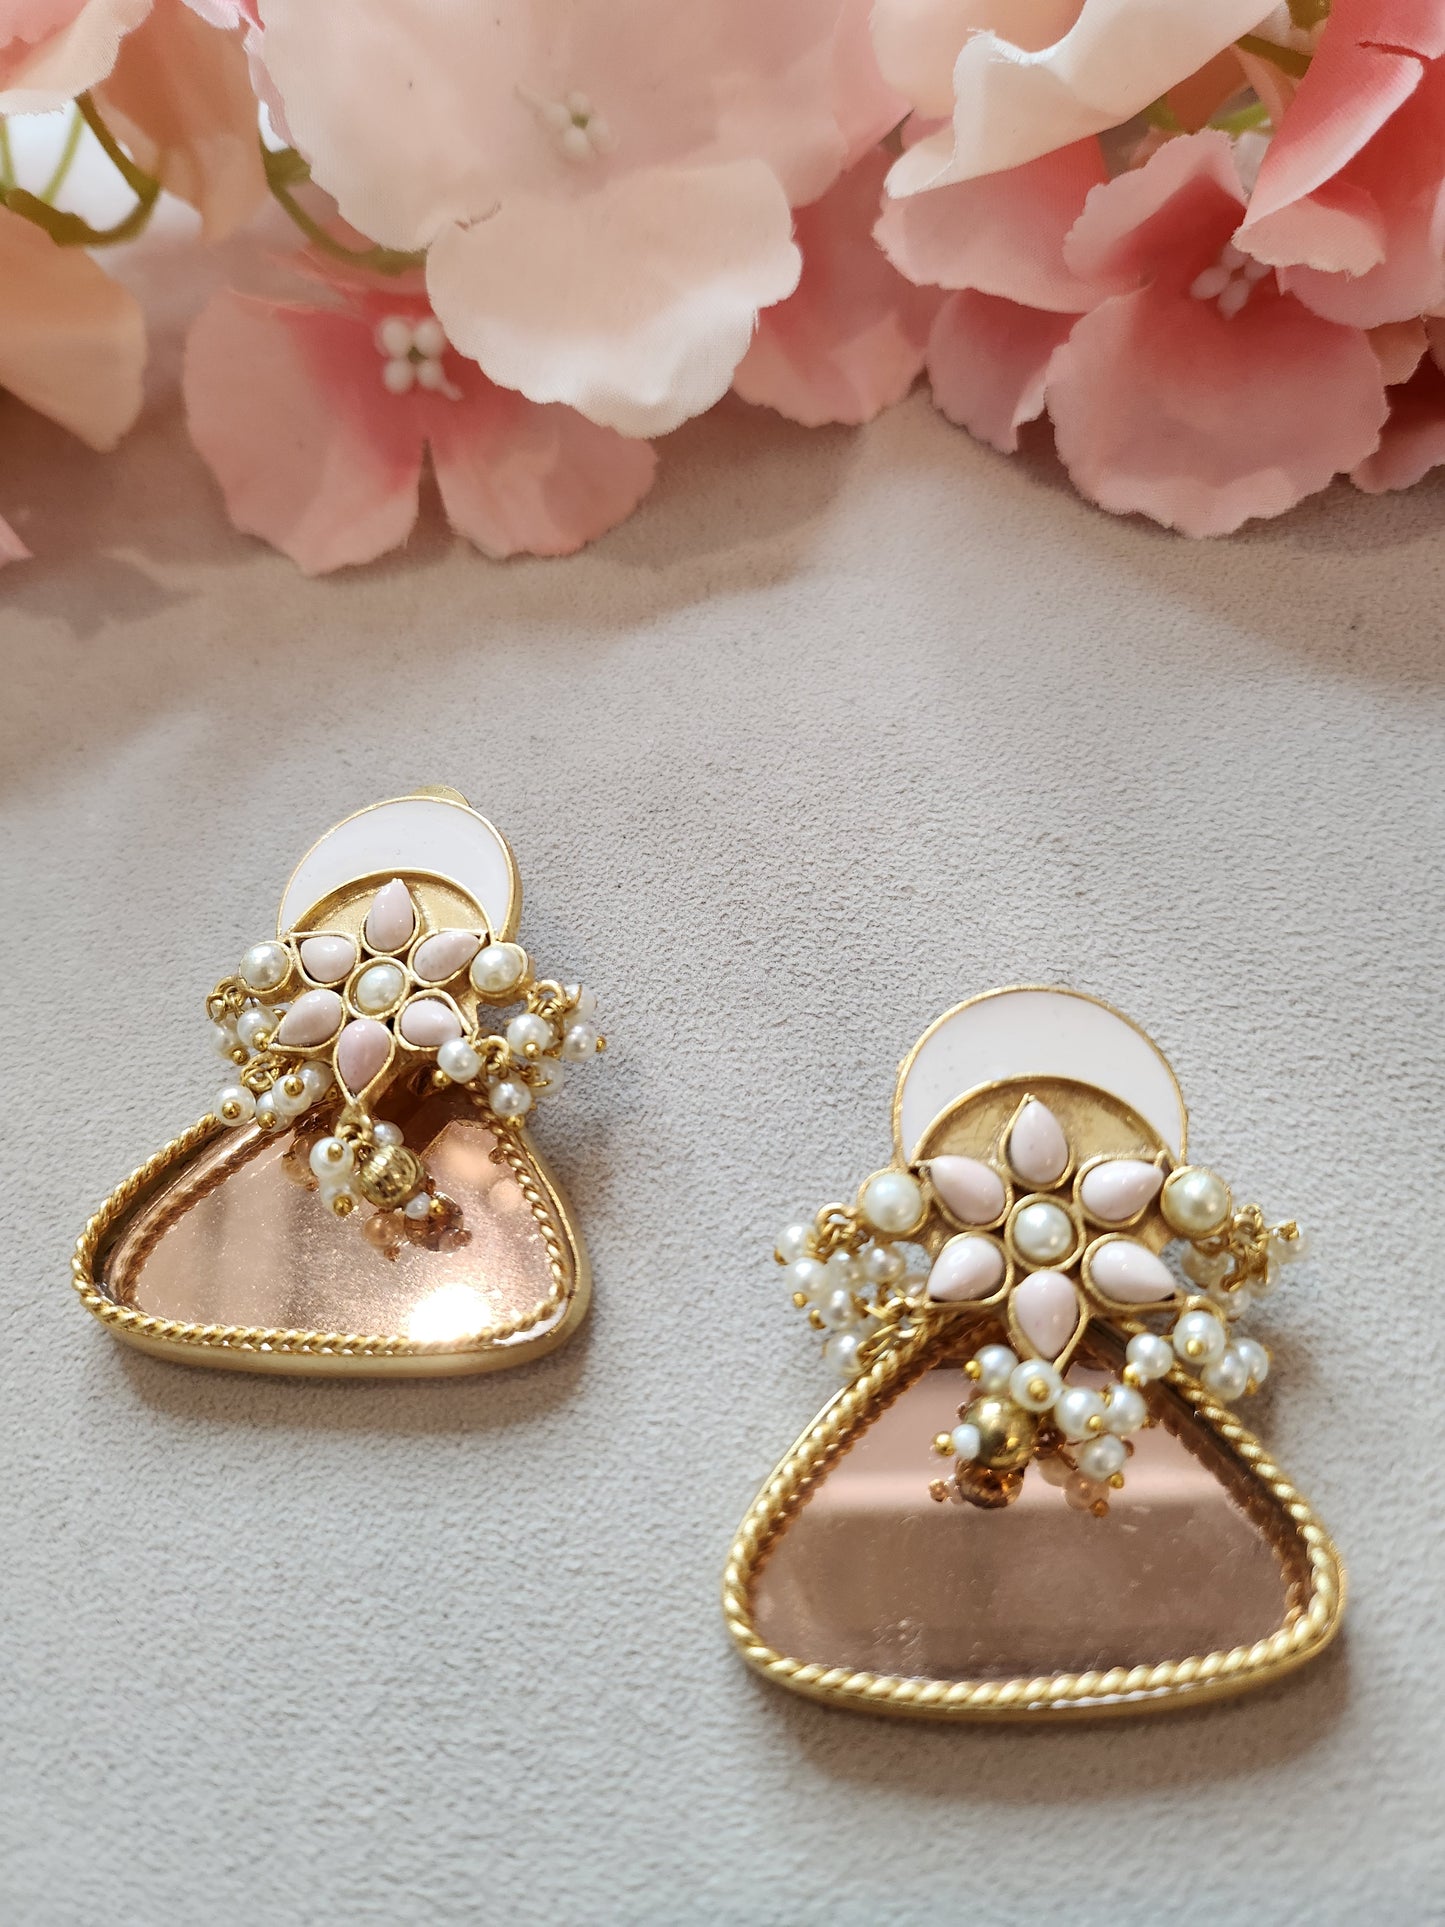 THE BUTTERFLY EFFECT JEWELRY - Rose gold mirror and enamel earrings